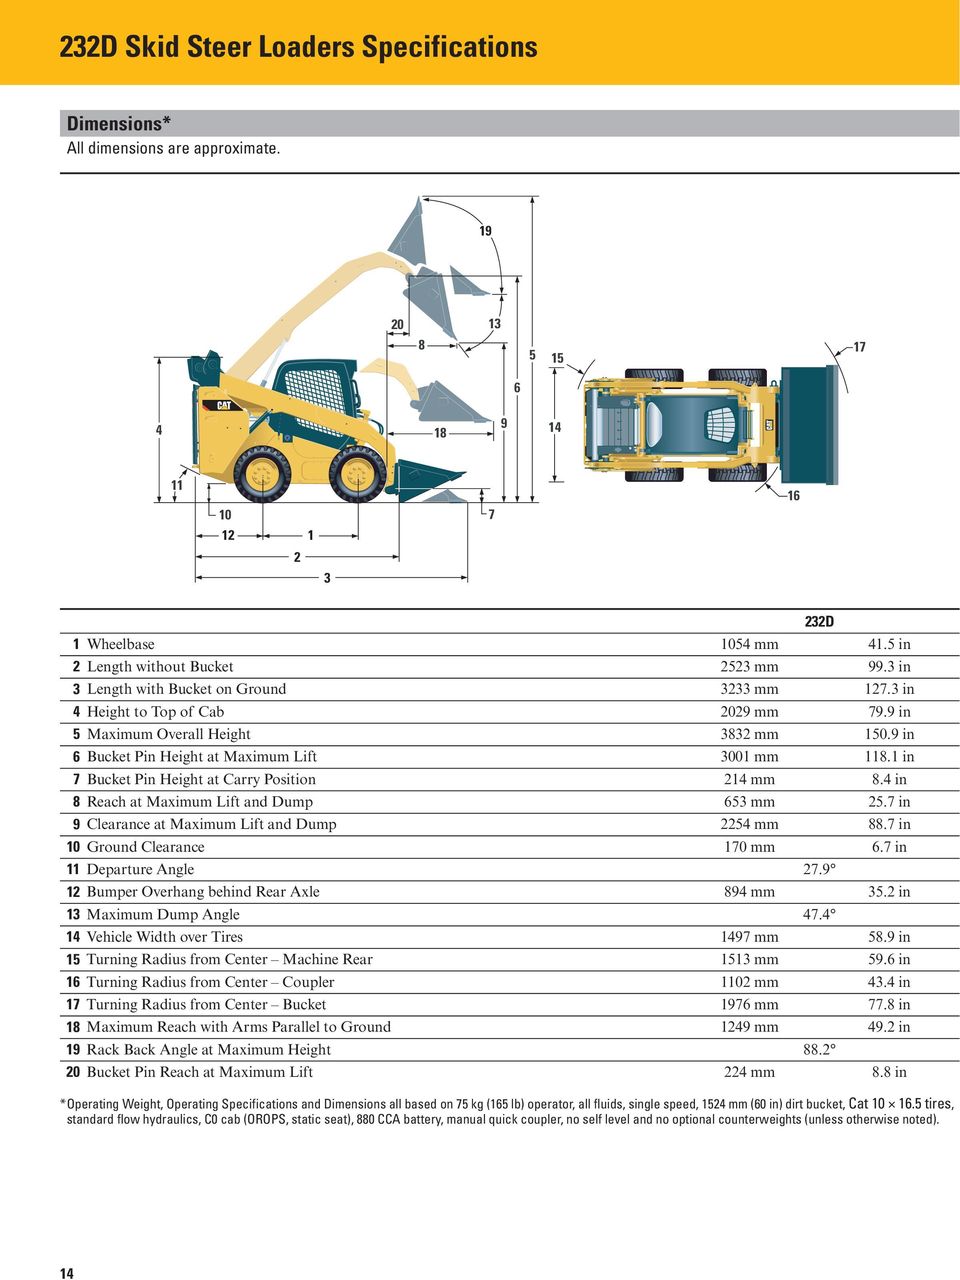 1 in 7 Bucket Pin Height at Carry Position 214 mm 8.4 in 8 Reach at Maximum Lift and Dump 653 mm 25.7 in 9 Clearance at Maximum Lift and Dump 2254 mm 88.7 in 10 Ground Clearance 170 mm 6.